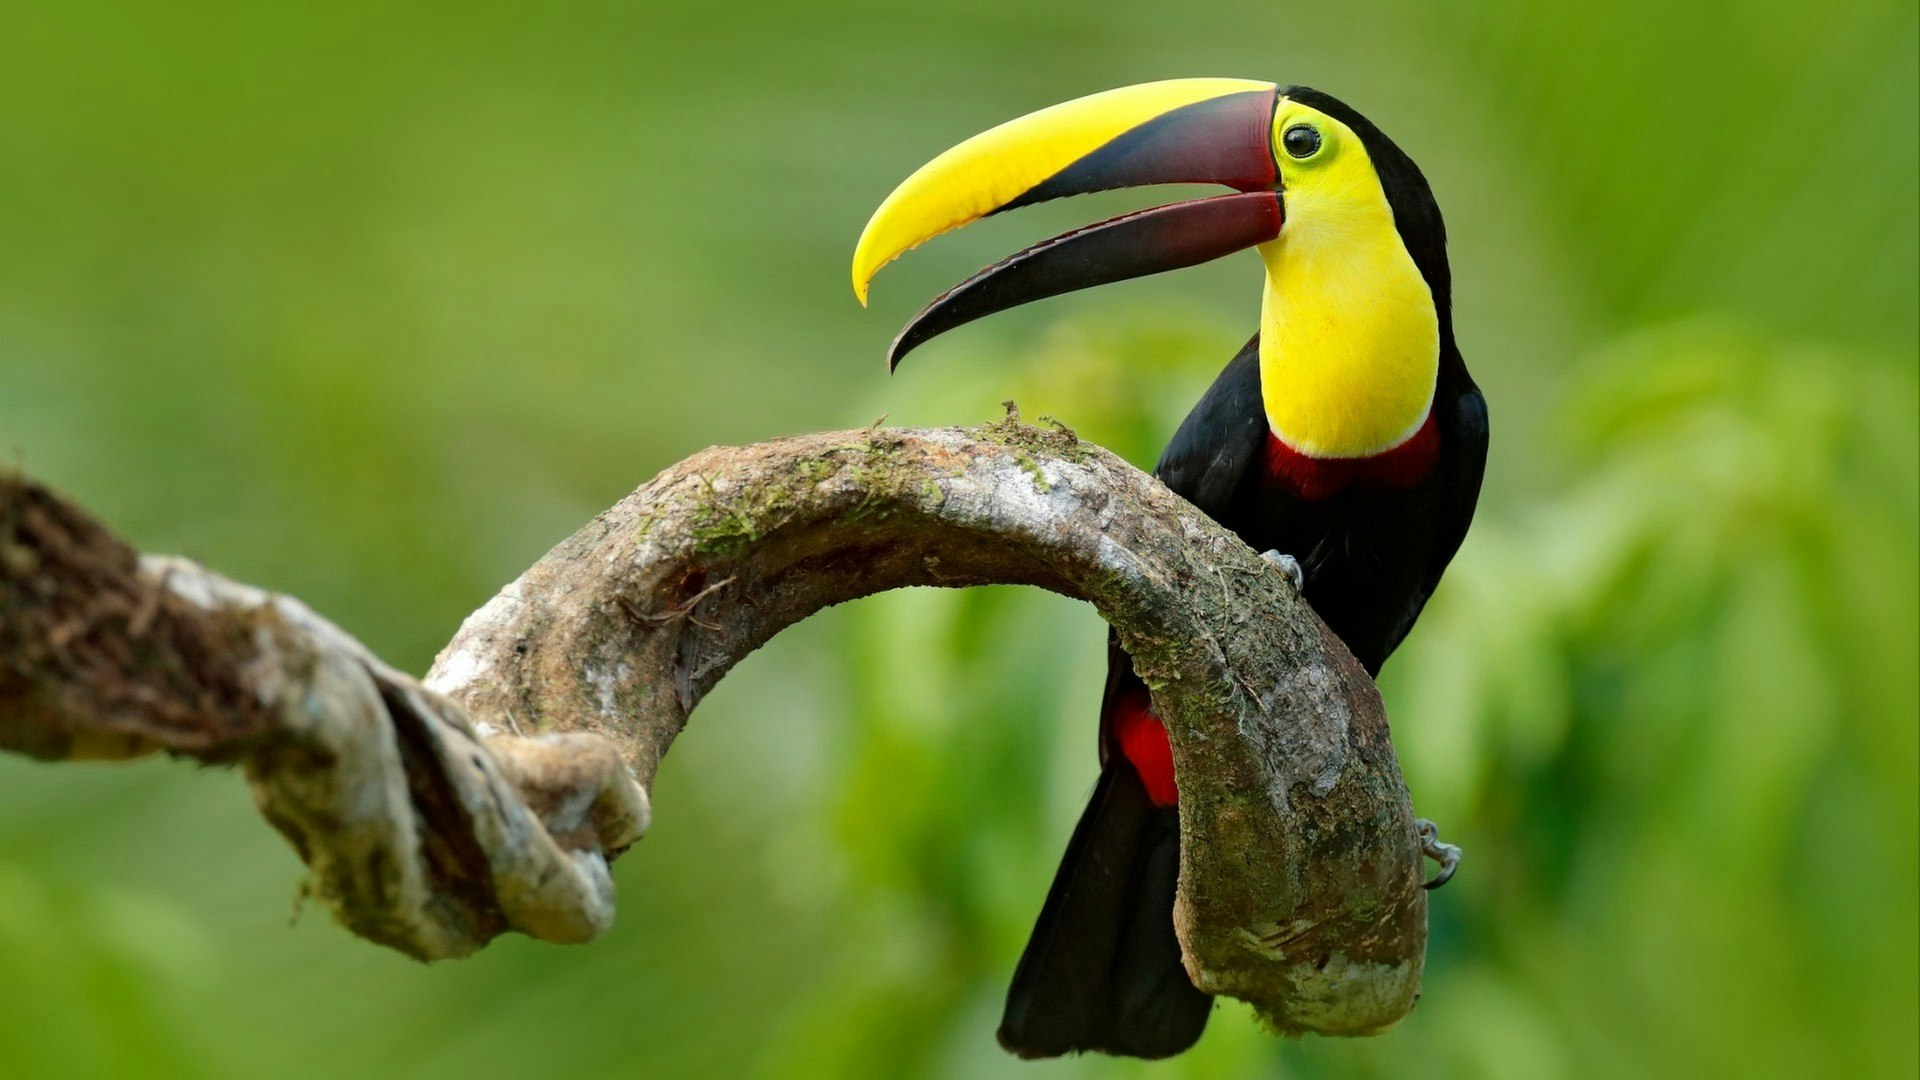 mandibled Toucan sitting on the branch in tropical rain with green jungle in background